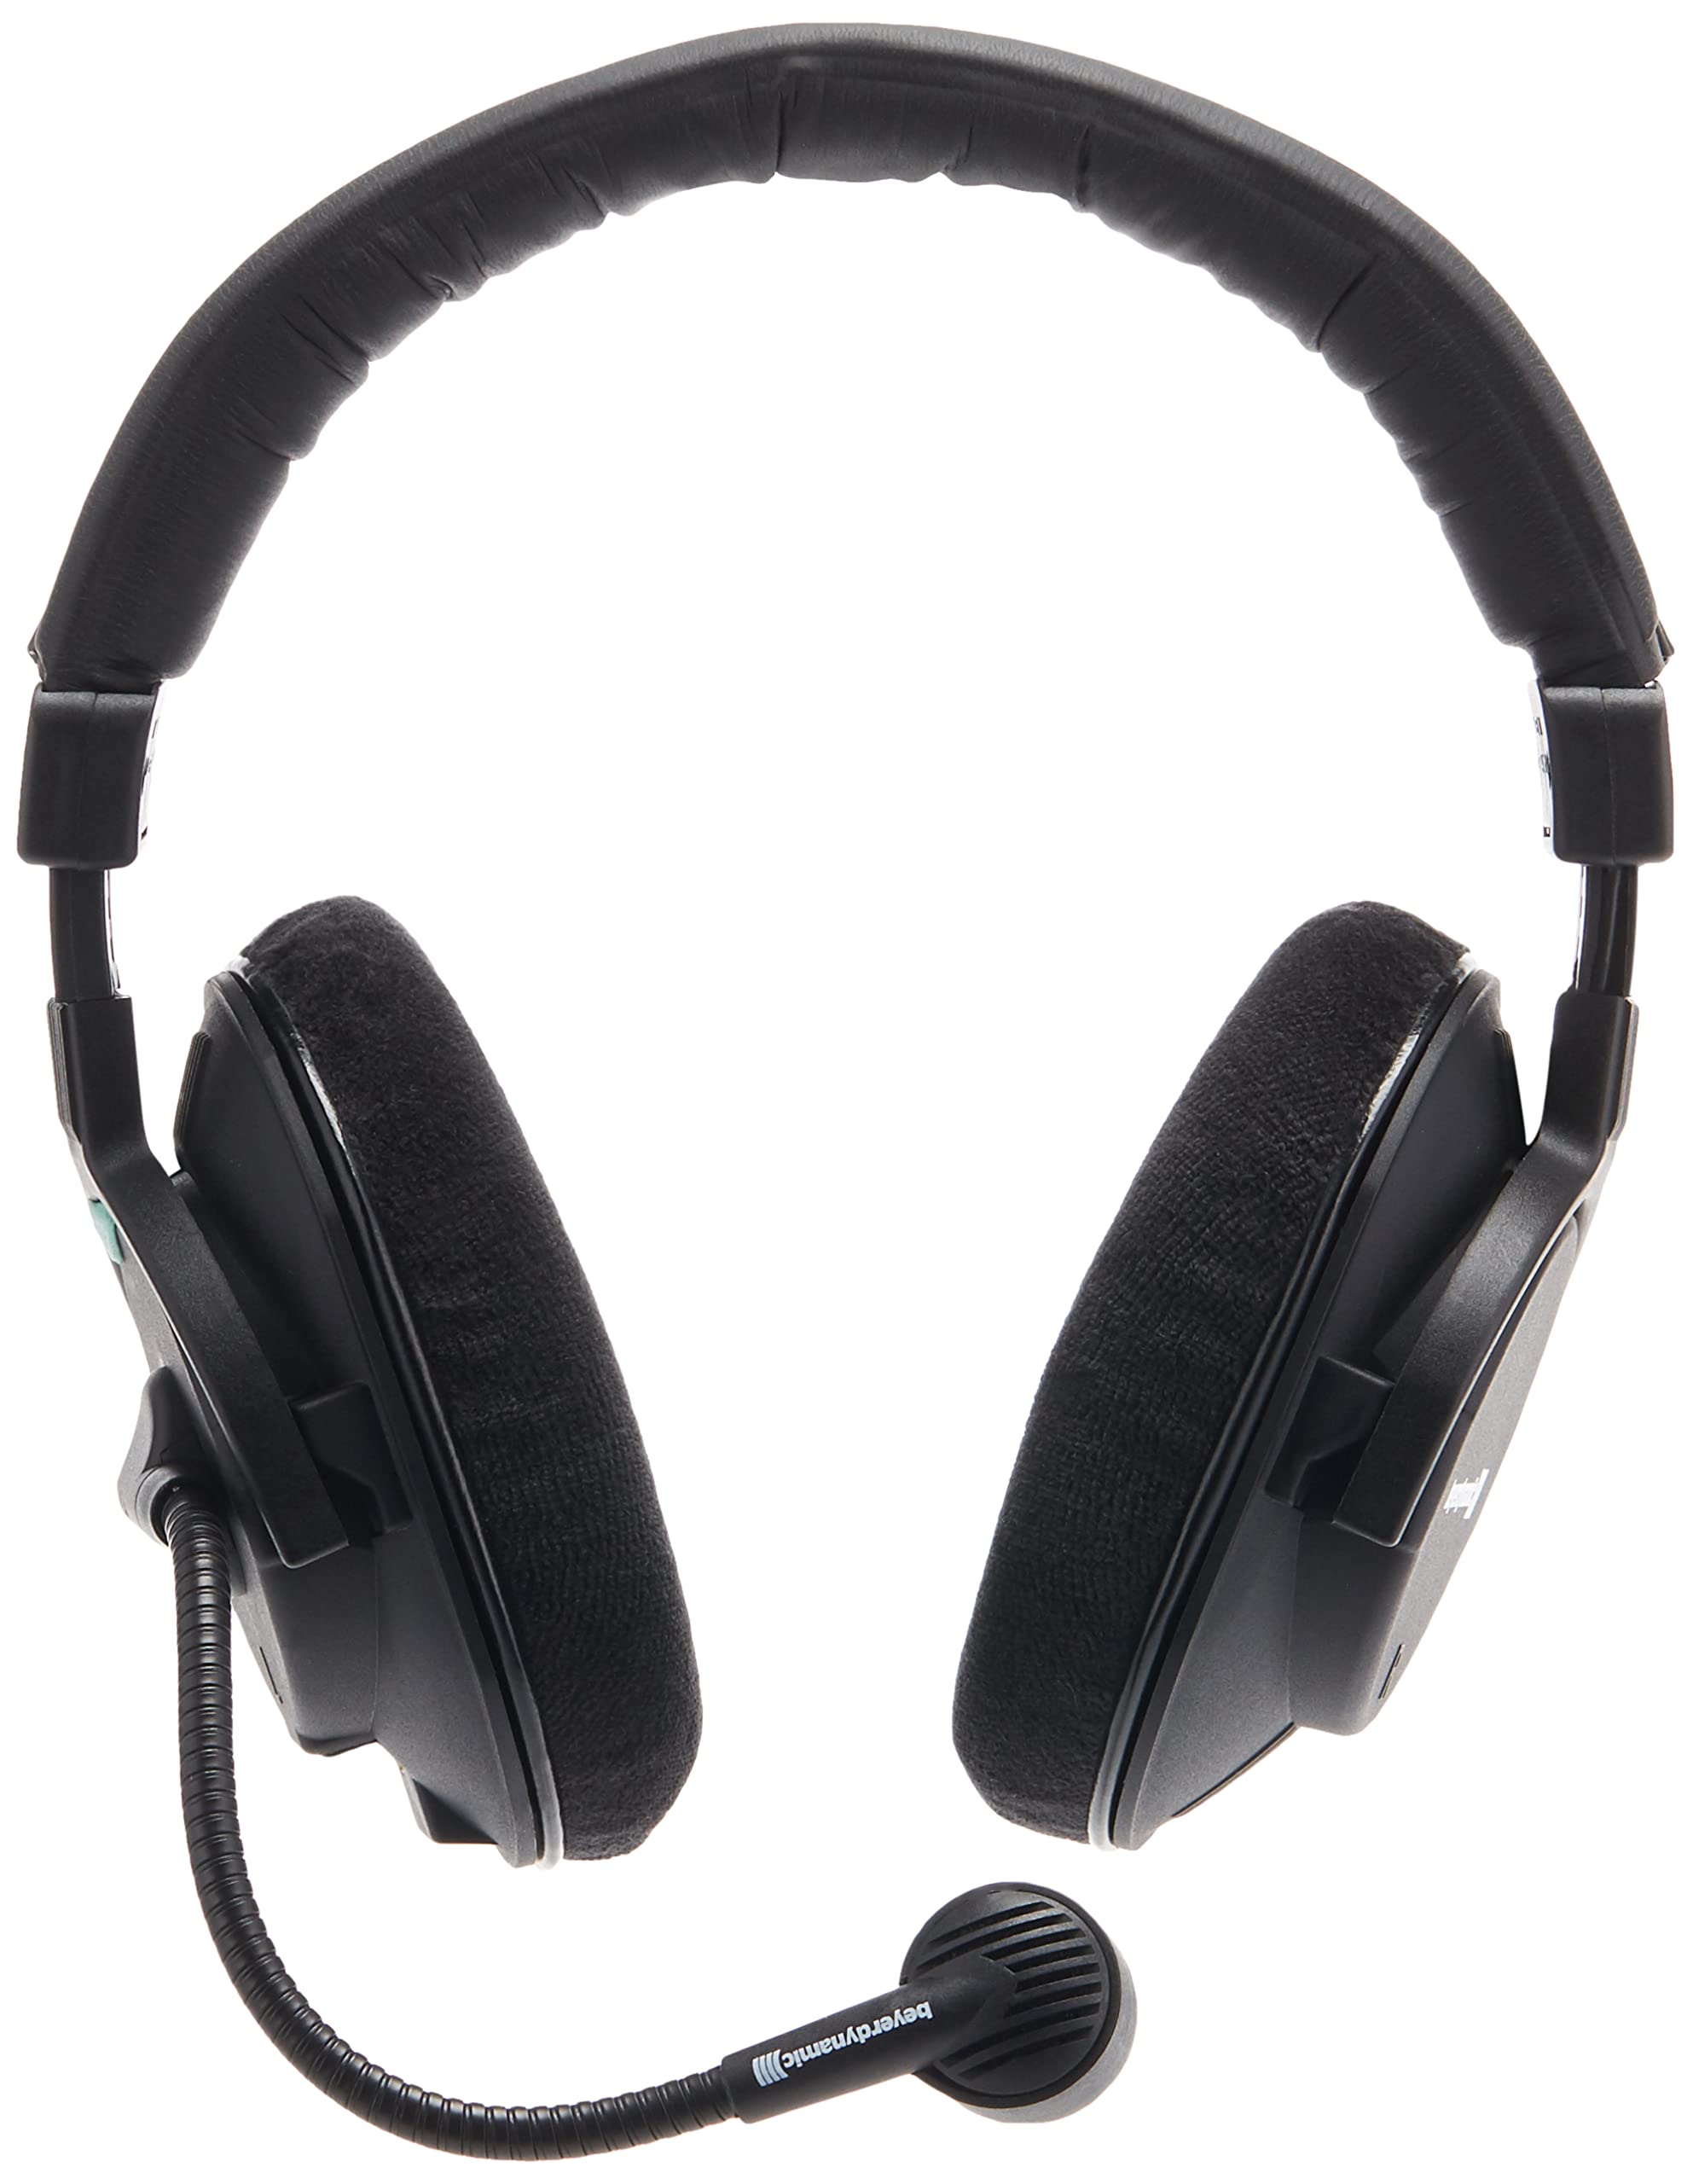 Beyerdynamic DT-290-MKII-200/80 Headset with Dynamic Hypercardioid Microphone for Broadcasting Applications, 80 Ohms